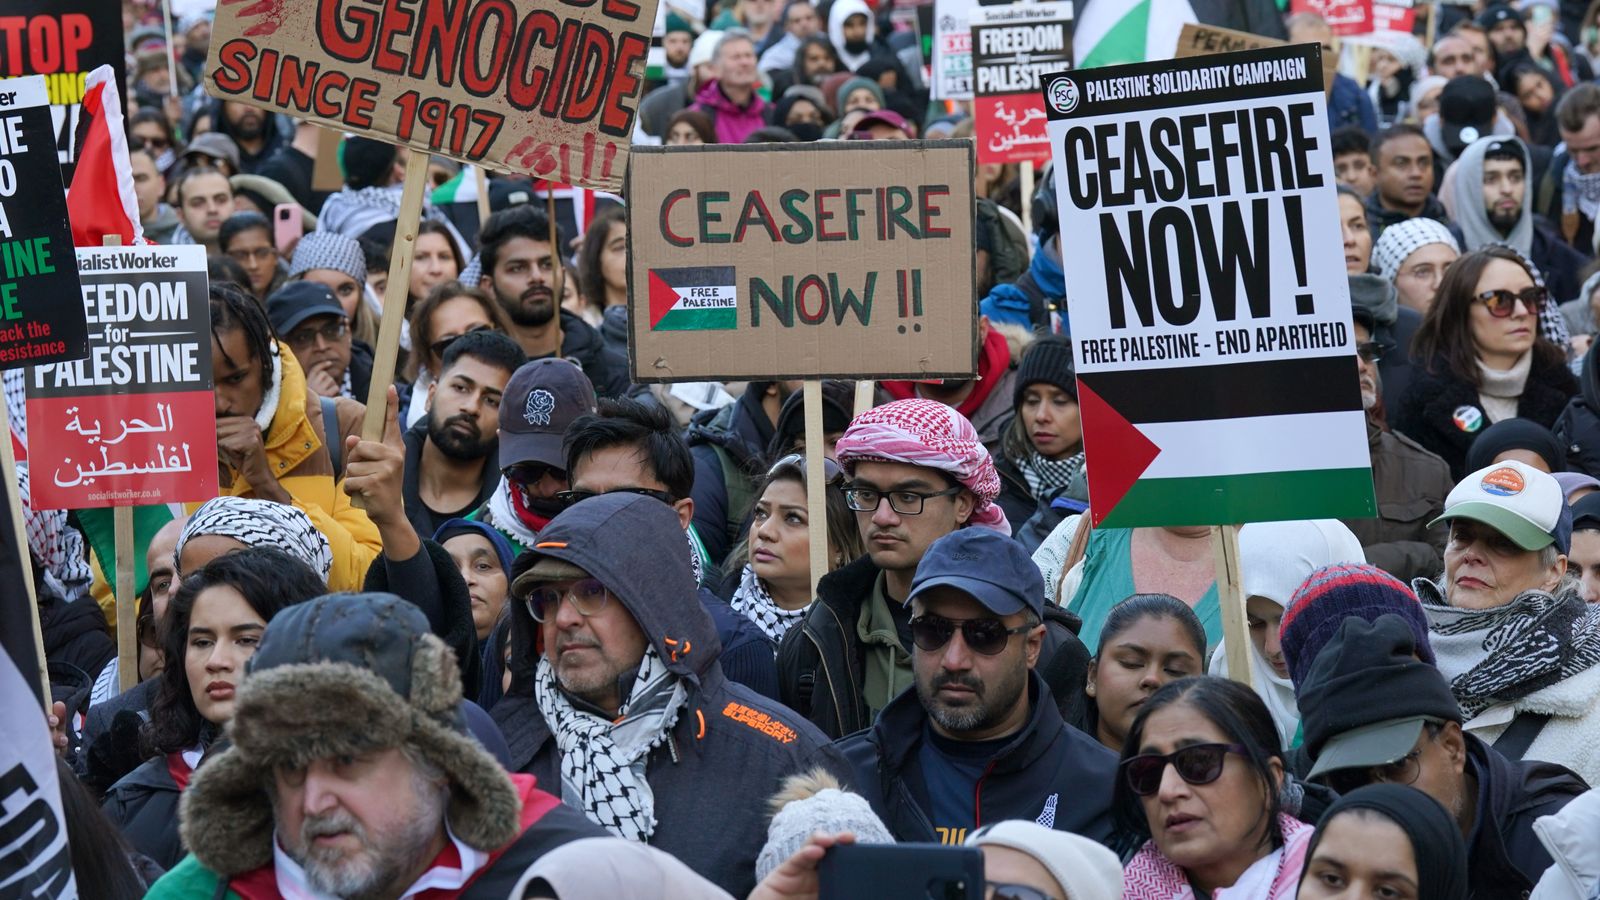 Israel-Hamas war: Tens of thousands take part in London protest for Gaza ceasefire